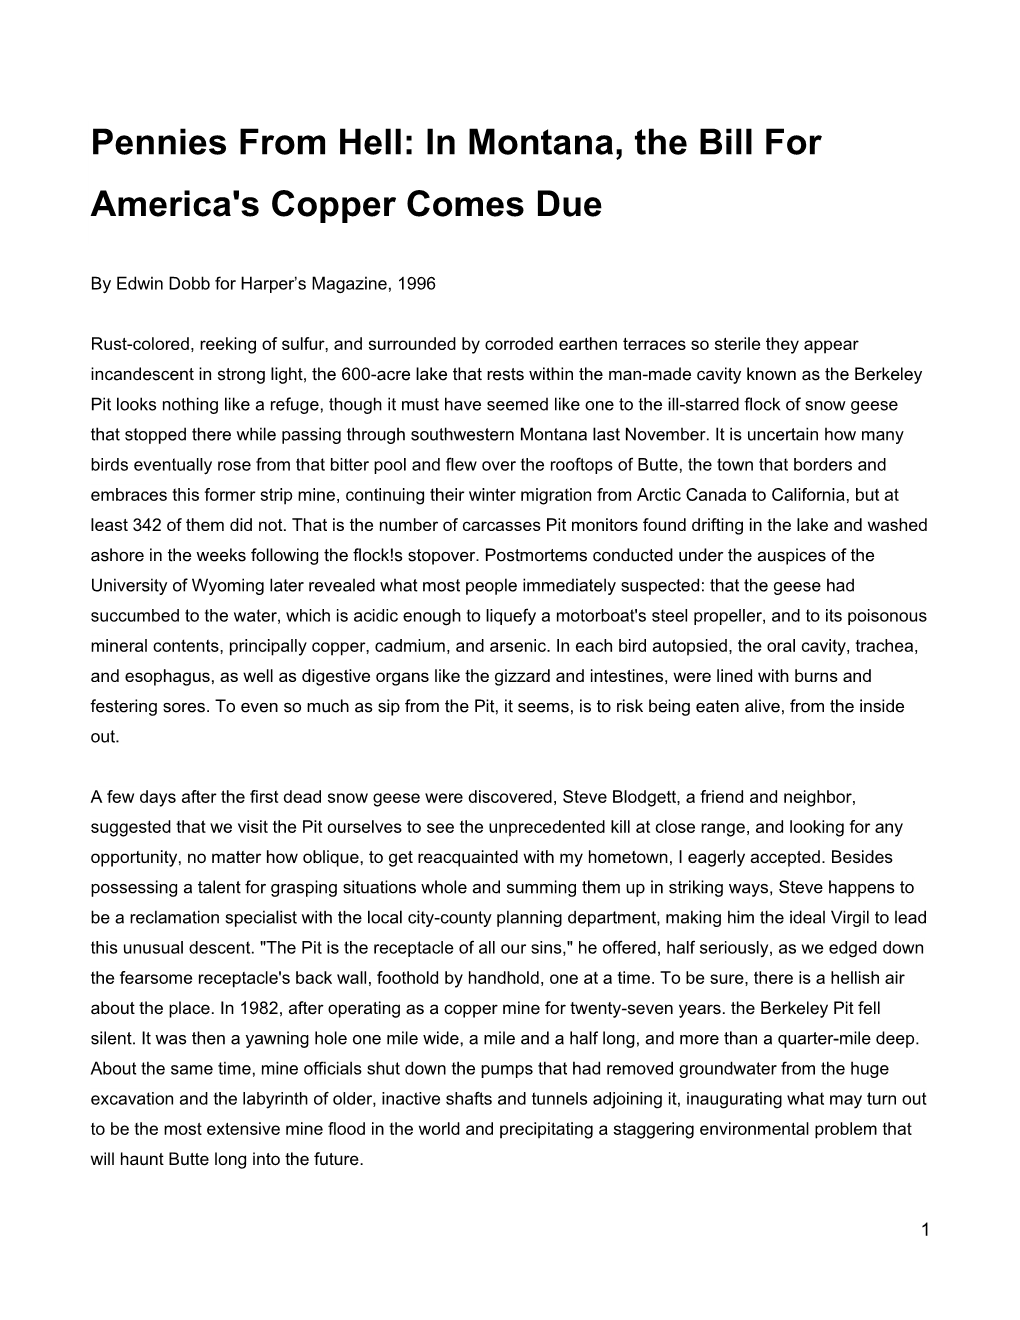 Pennies from Hell: in Montana, the Bill for America's Copper Comes Due